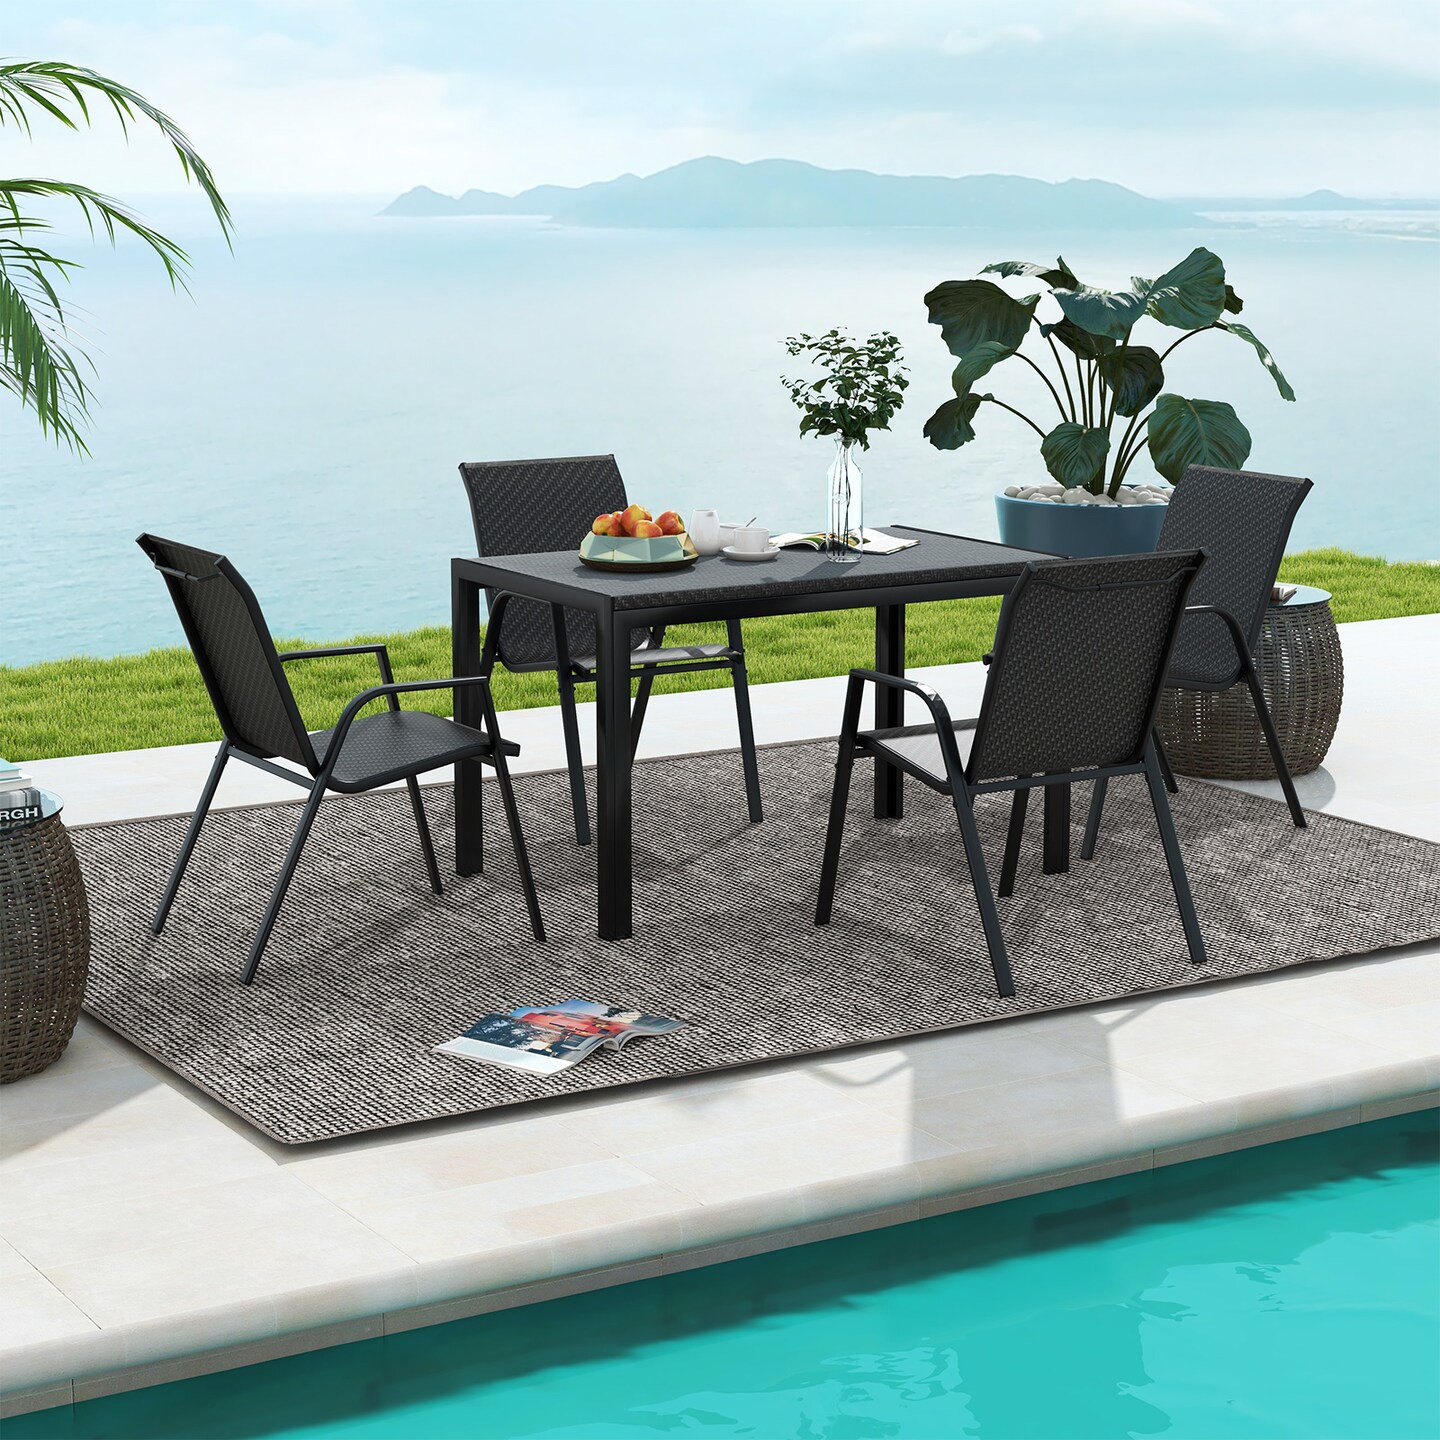 4 Piece Patio Rattan Dining Chairs With Wicker Woven Seat And Back For Backyard Front Porch